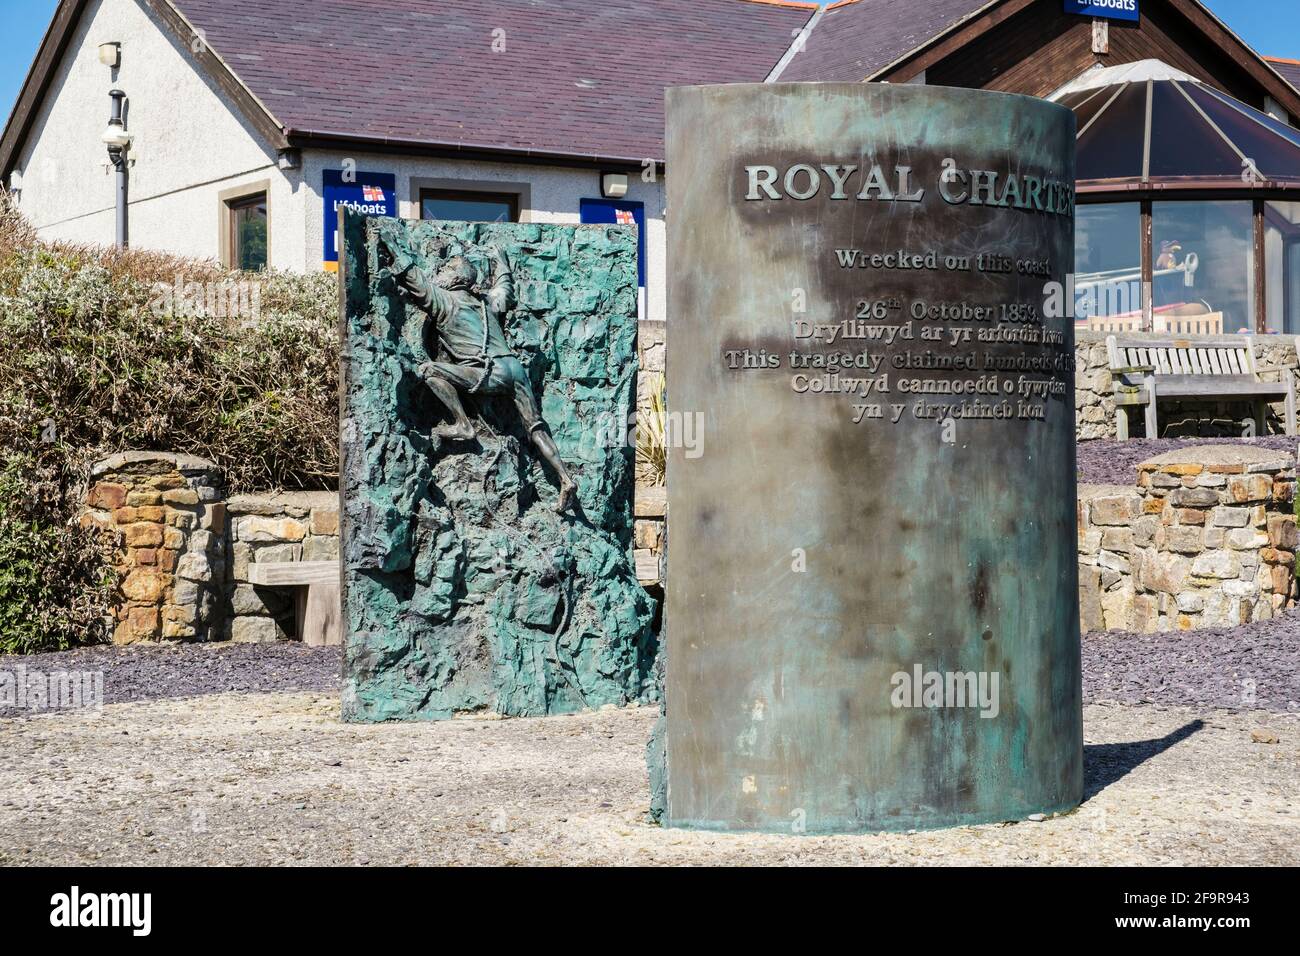 Royal Charter shipwreck bronze memorial sculptures outside the RNLI Visitor Centre in Moelfre, Isle of Anglesey, north Wales, UK, Britain Stock Photo